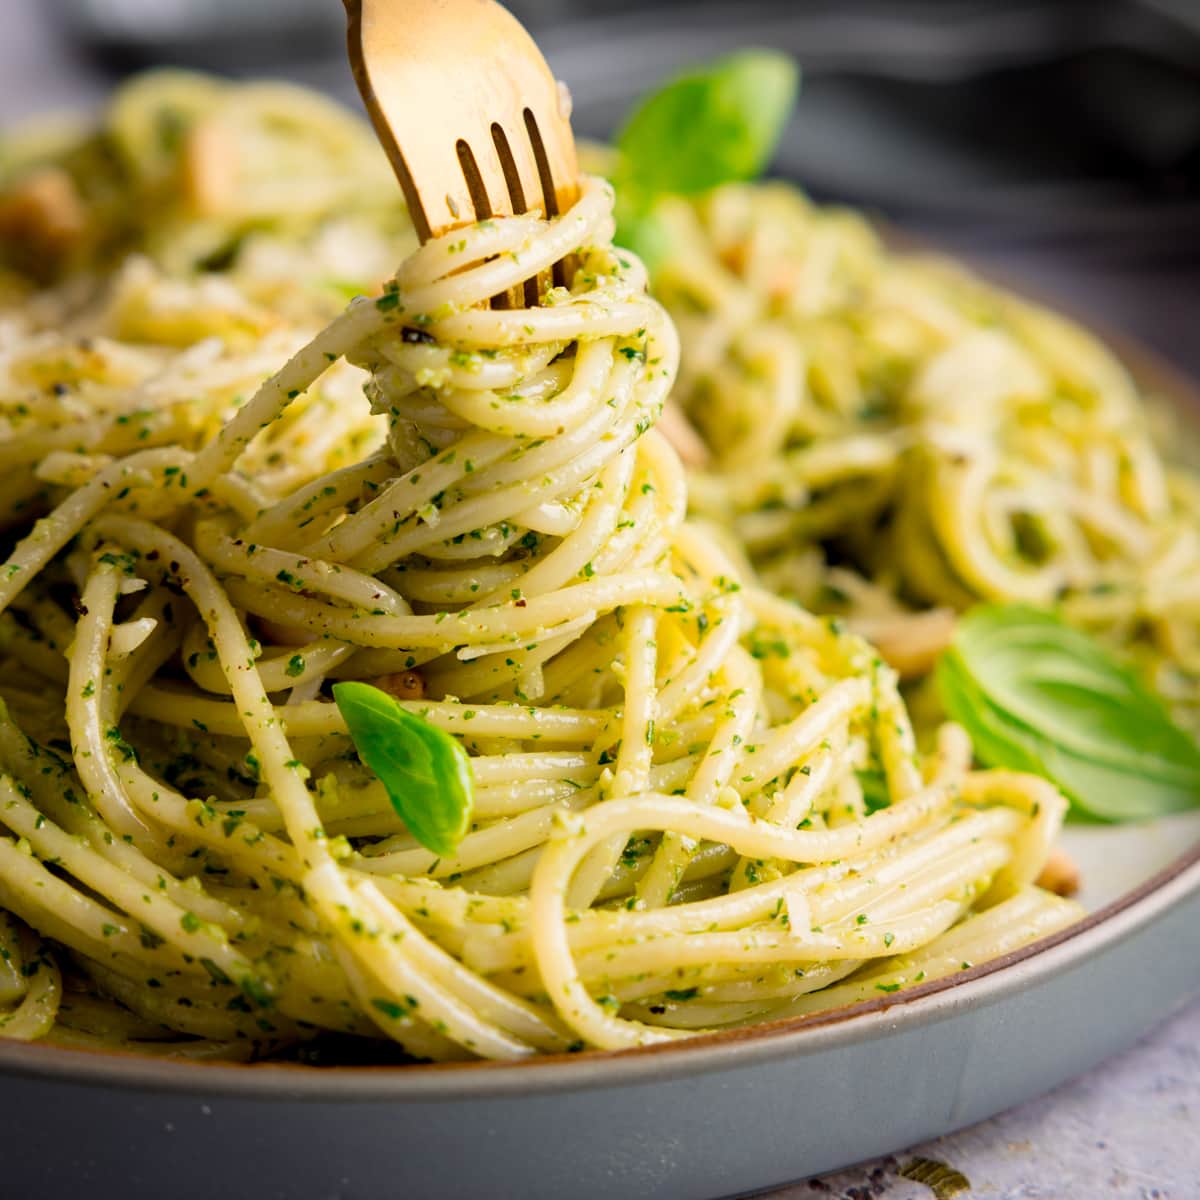 Square image of pesto spaghetti on a light grey plate being swirled with a gold fork. The pasta is sprinkled with baby basil leaves, toasted pine nuts and parmesan. The plate is on a light grey surface.